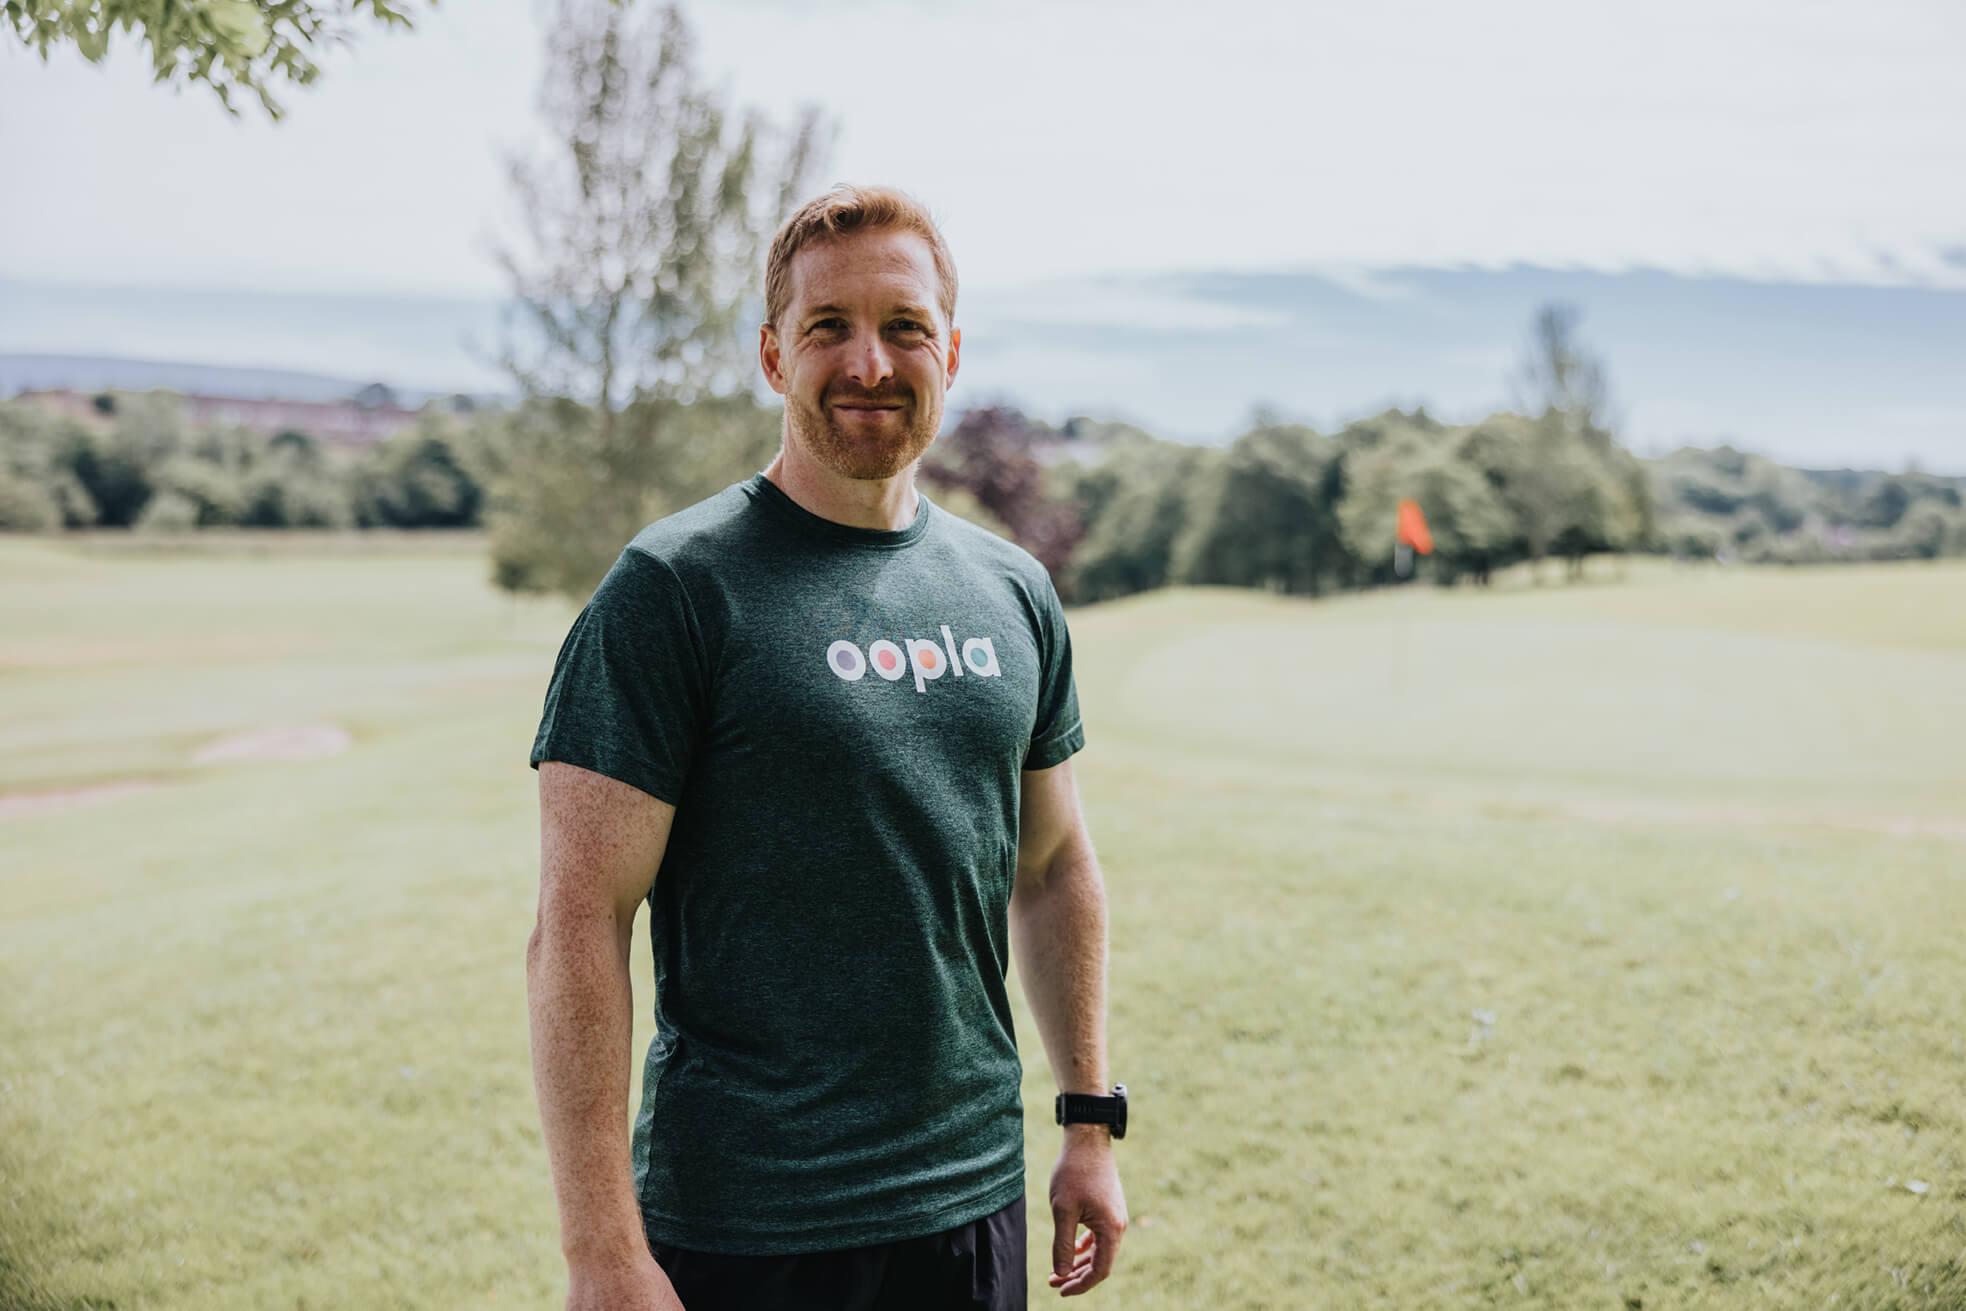 Support to Perform’s CEO Jonny Bloomfield models an Oopla t-shirt on a sports field. 